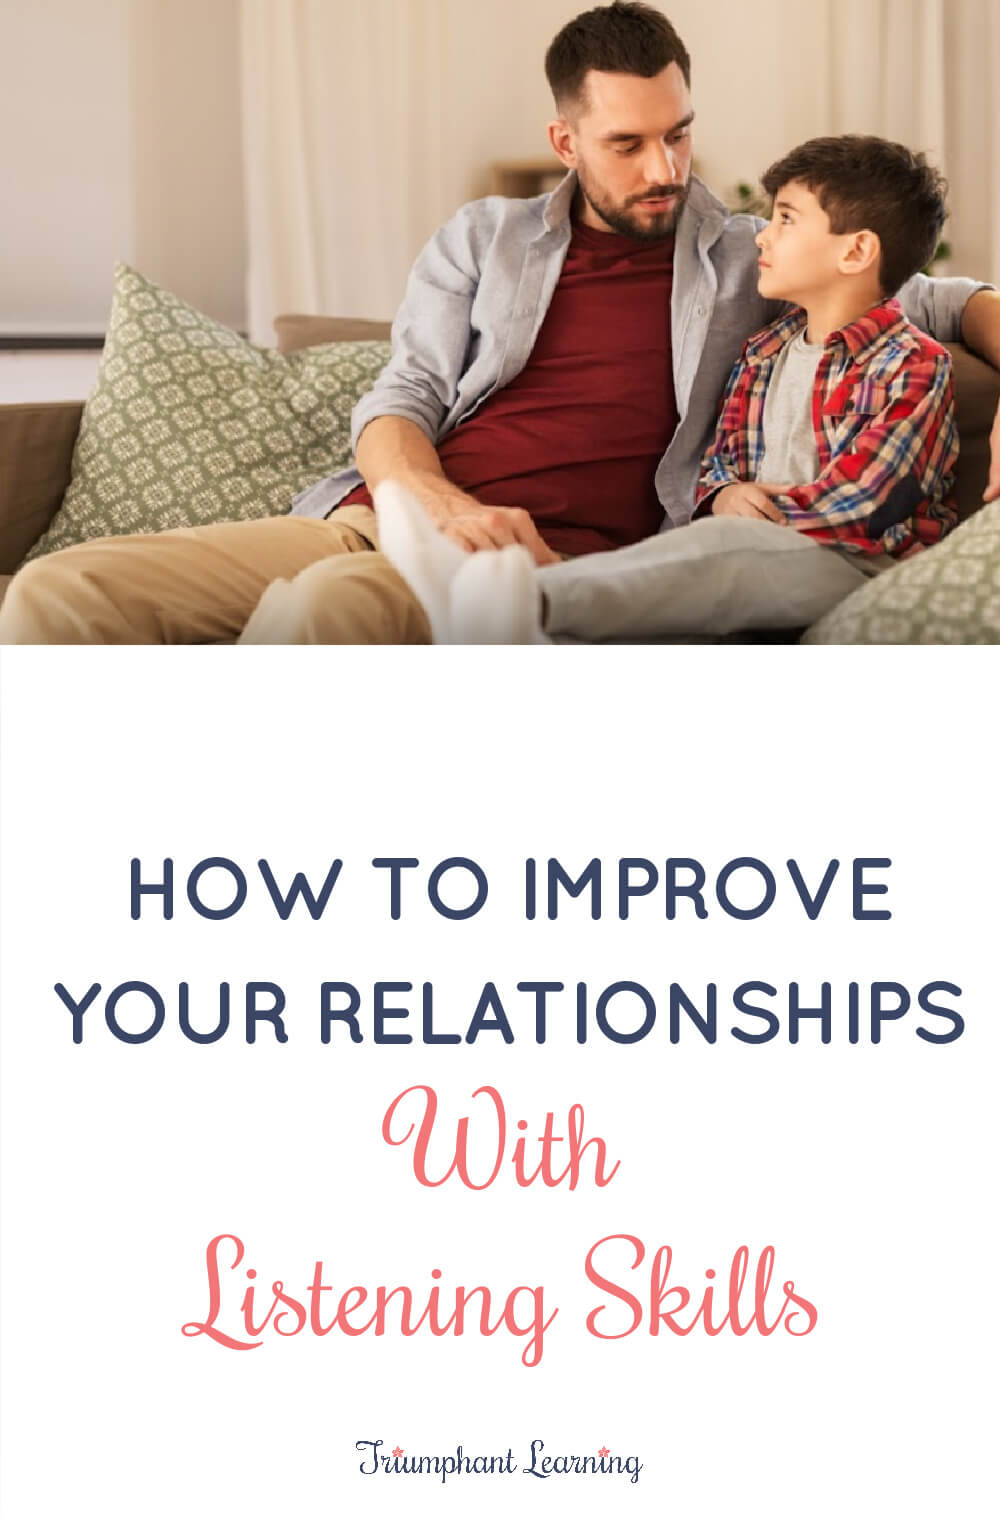 How you listen and respond affects all aspects of your home atmosphere, including your relationships and homeschool lessons. Learn how to get started. via @TriLearning